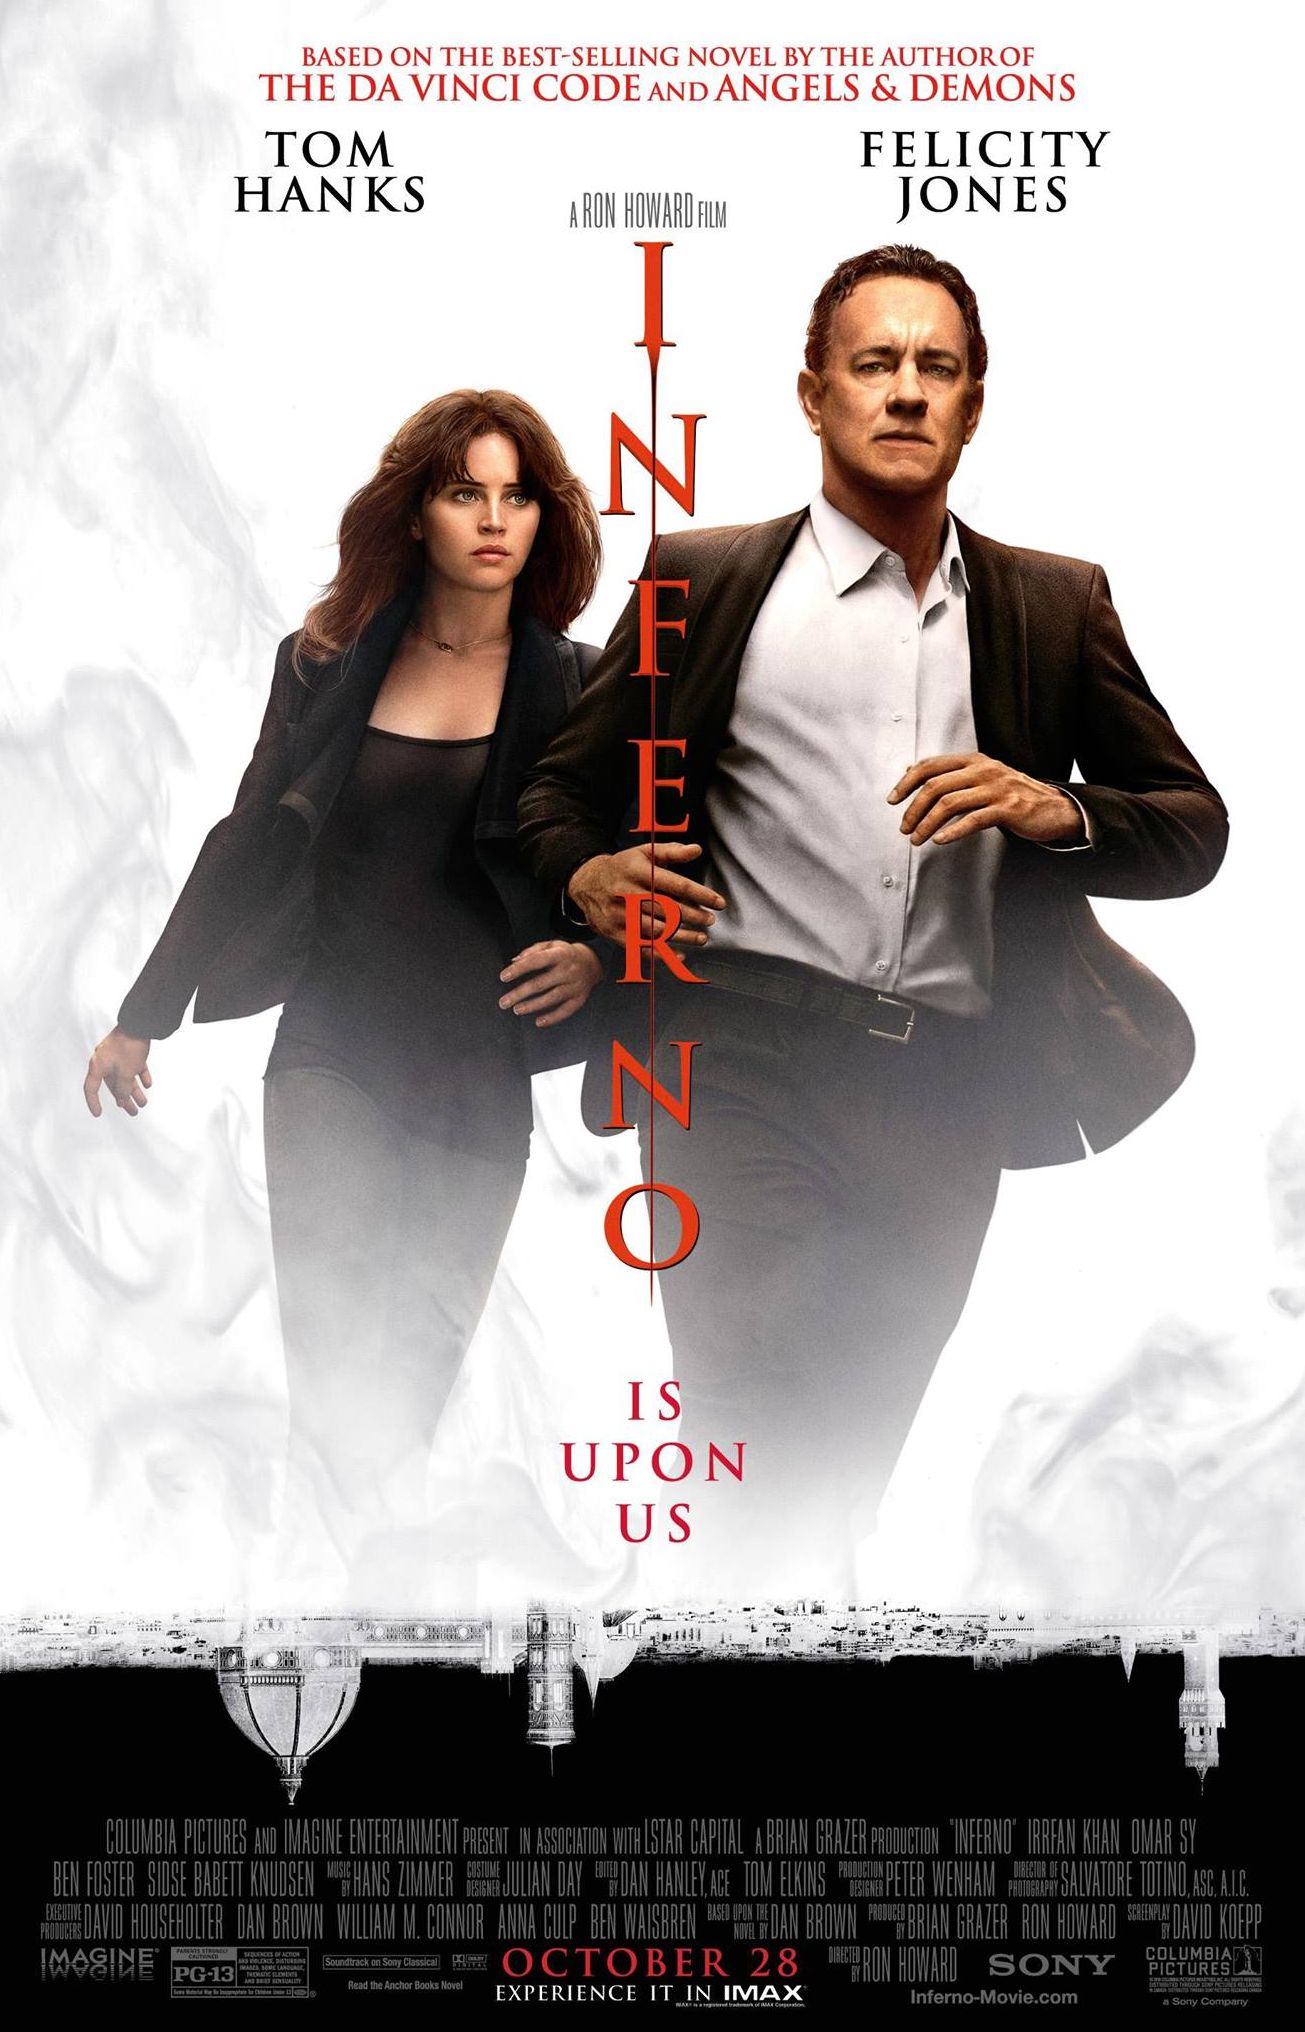 Tom Hanks is back for the latest poster promoting 'Inferno,'